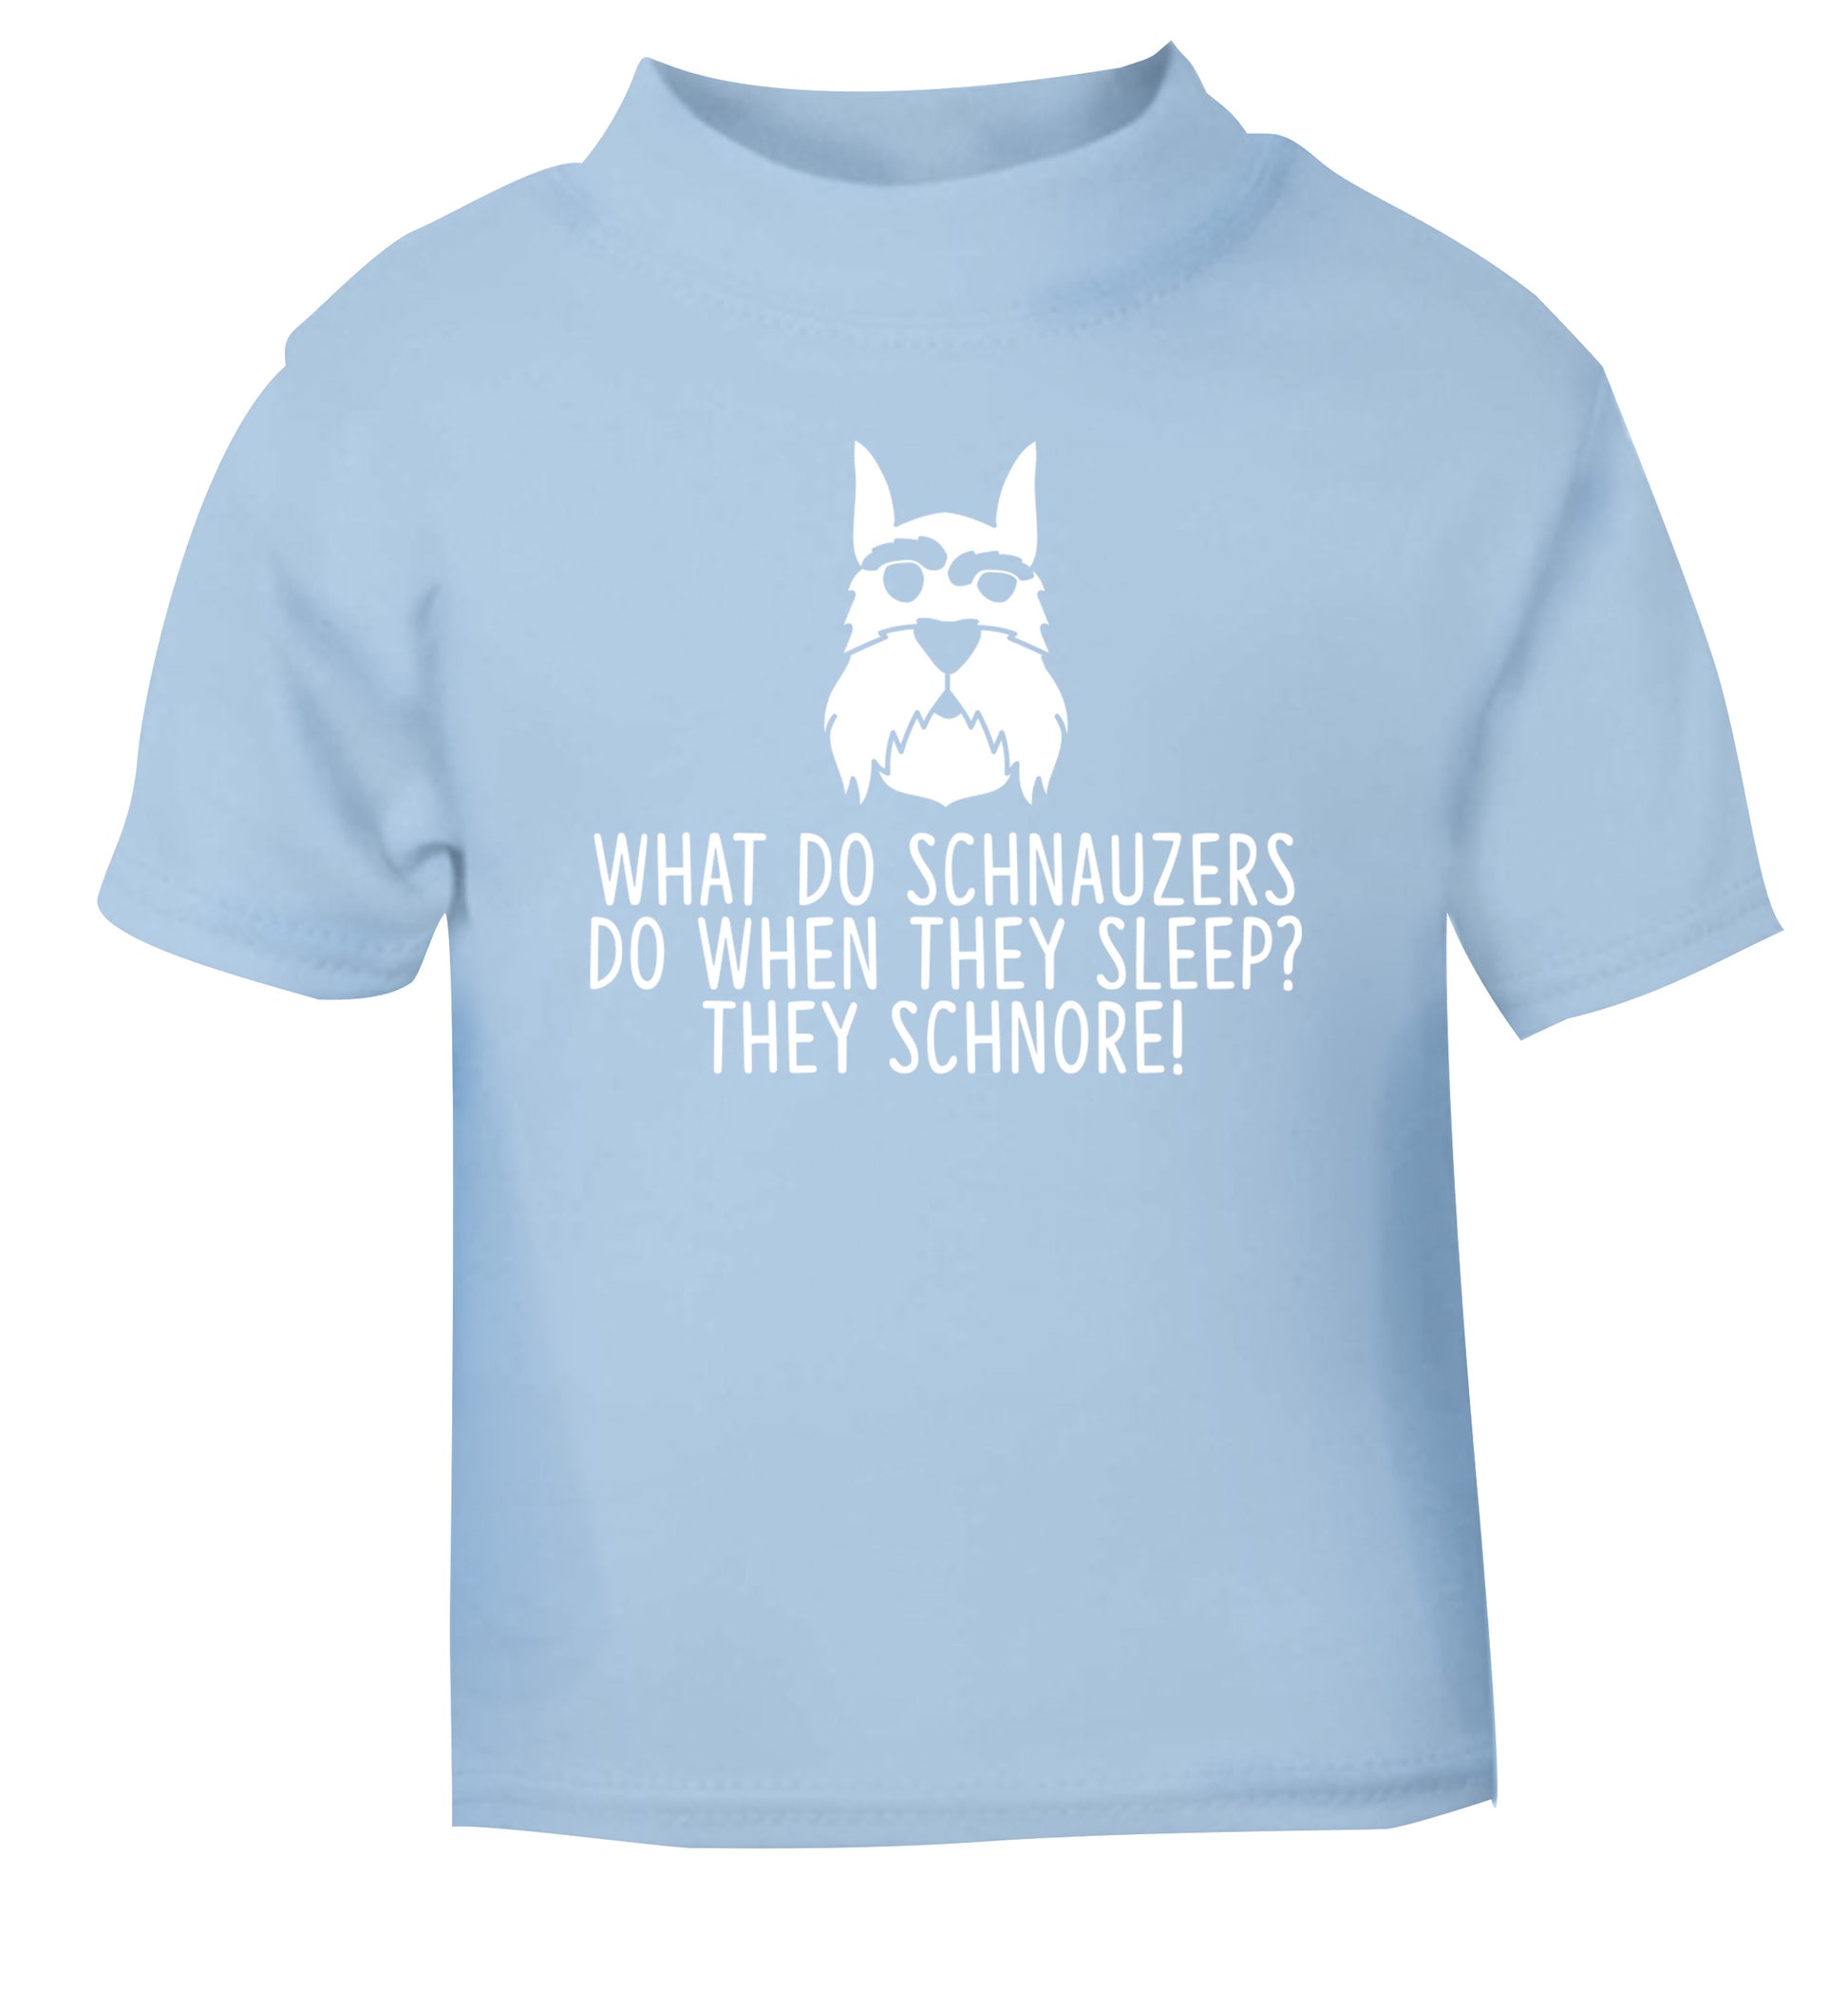 What do schnauzers do when they sleep? Schnore! light blue Baby Toddler Tshirt 2 Years